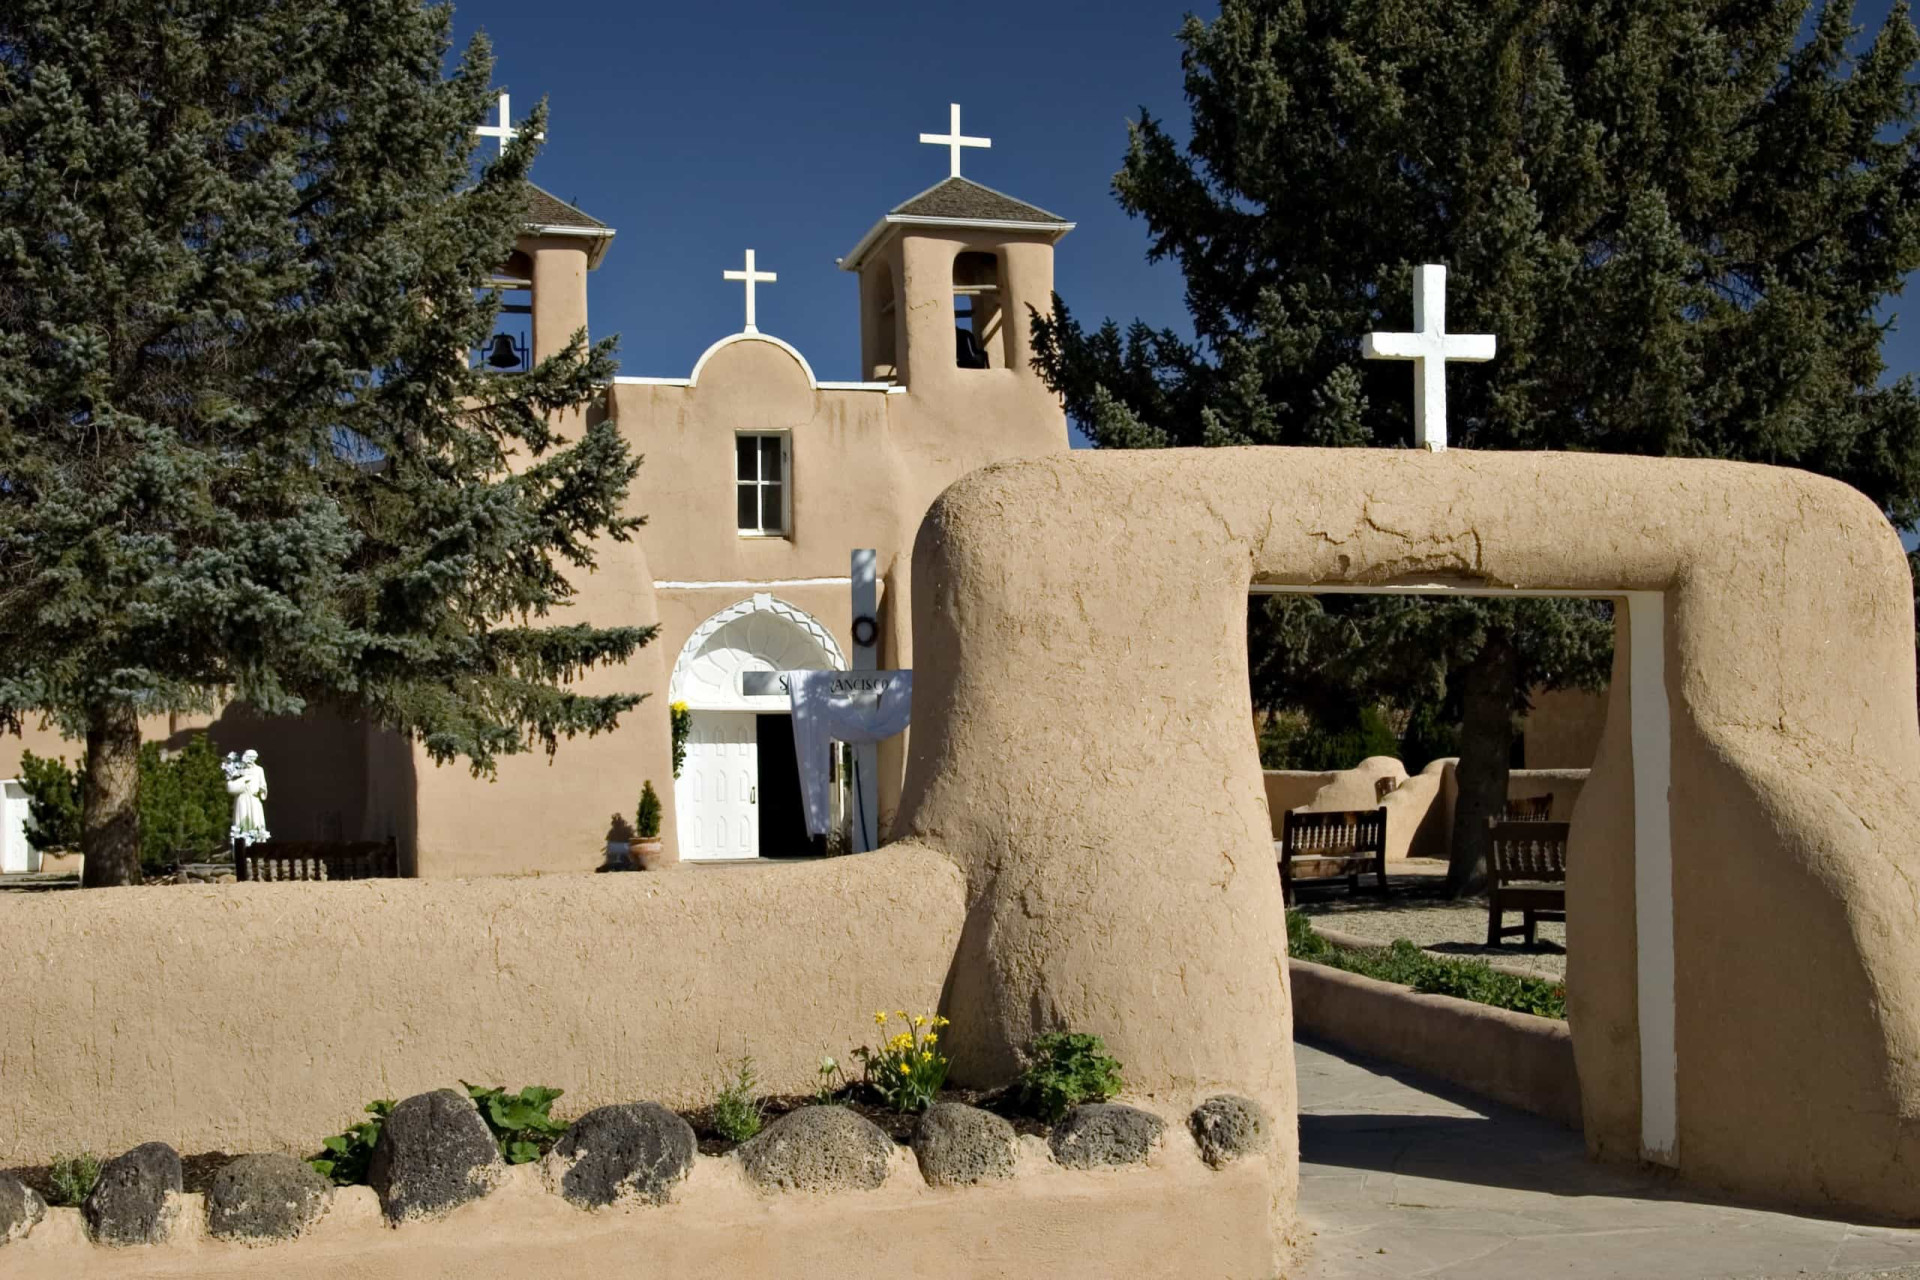 <p>Nearby Ranchos de Taos is worth a detour for its beautiful San Francisco de Asís Mission Church. Built between 1772 and 1816, its stands as a fine example of a New Mexico Spanish colonial place of worship.</p>